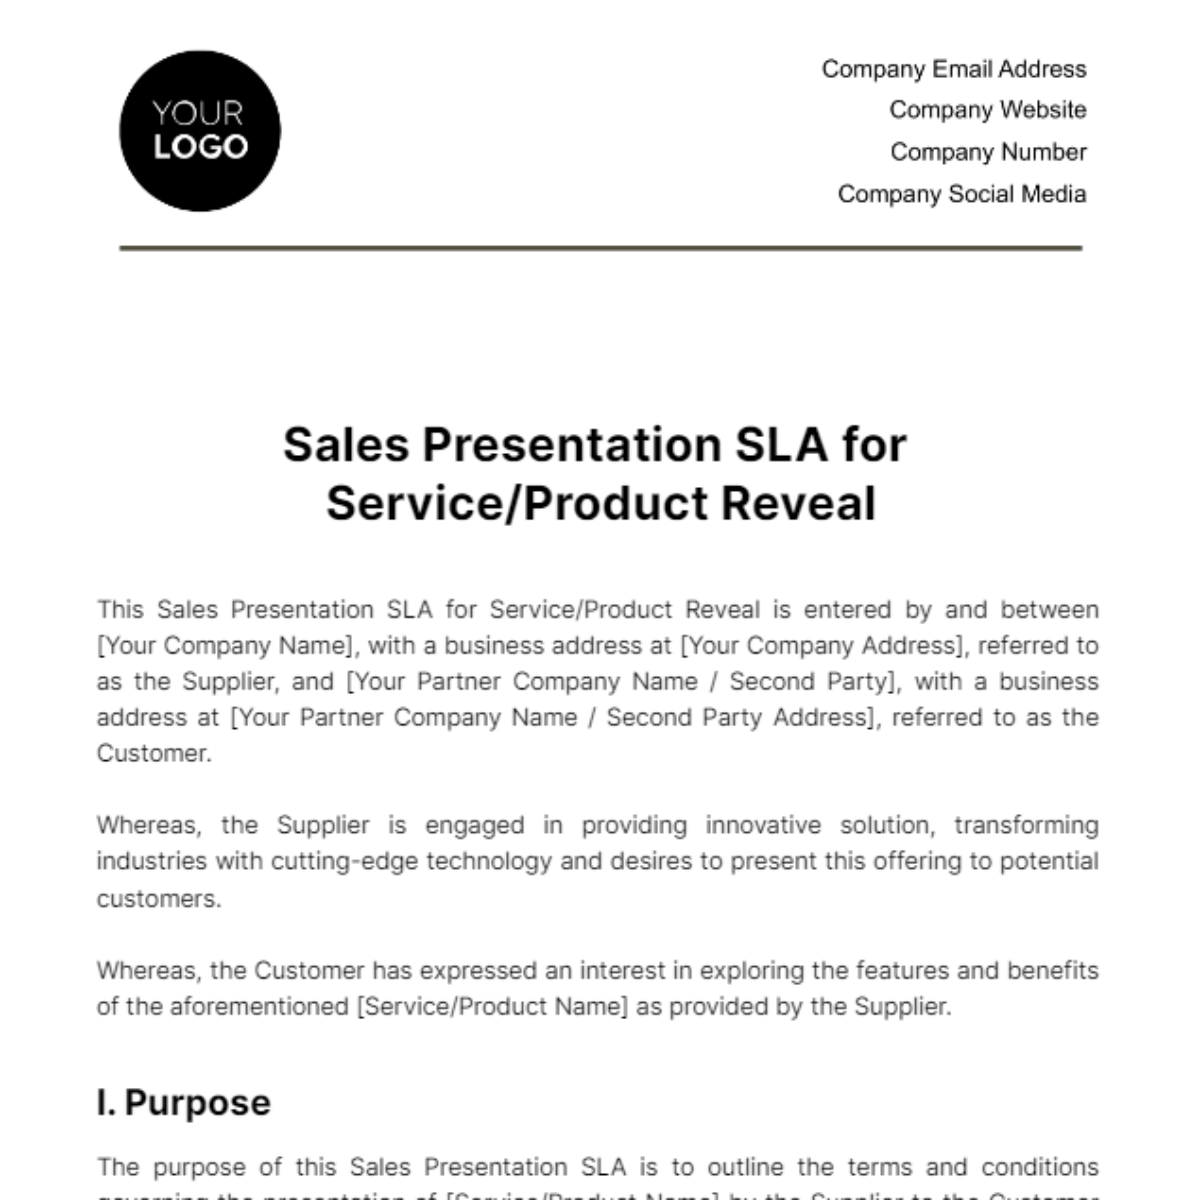 Free Sales Presentation SLA for Service/Product Reveal Template